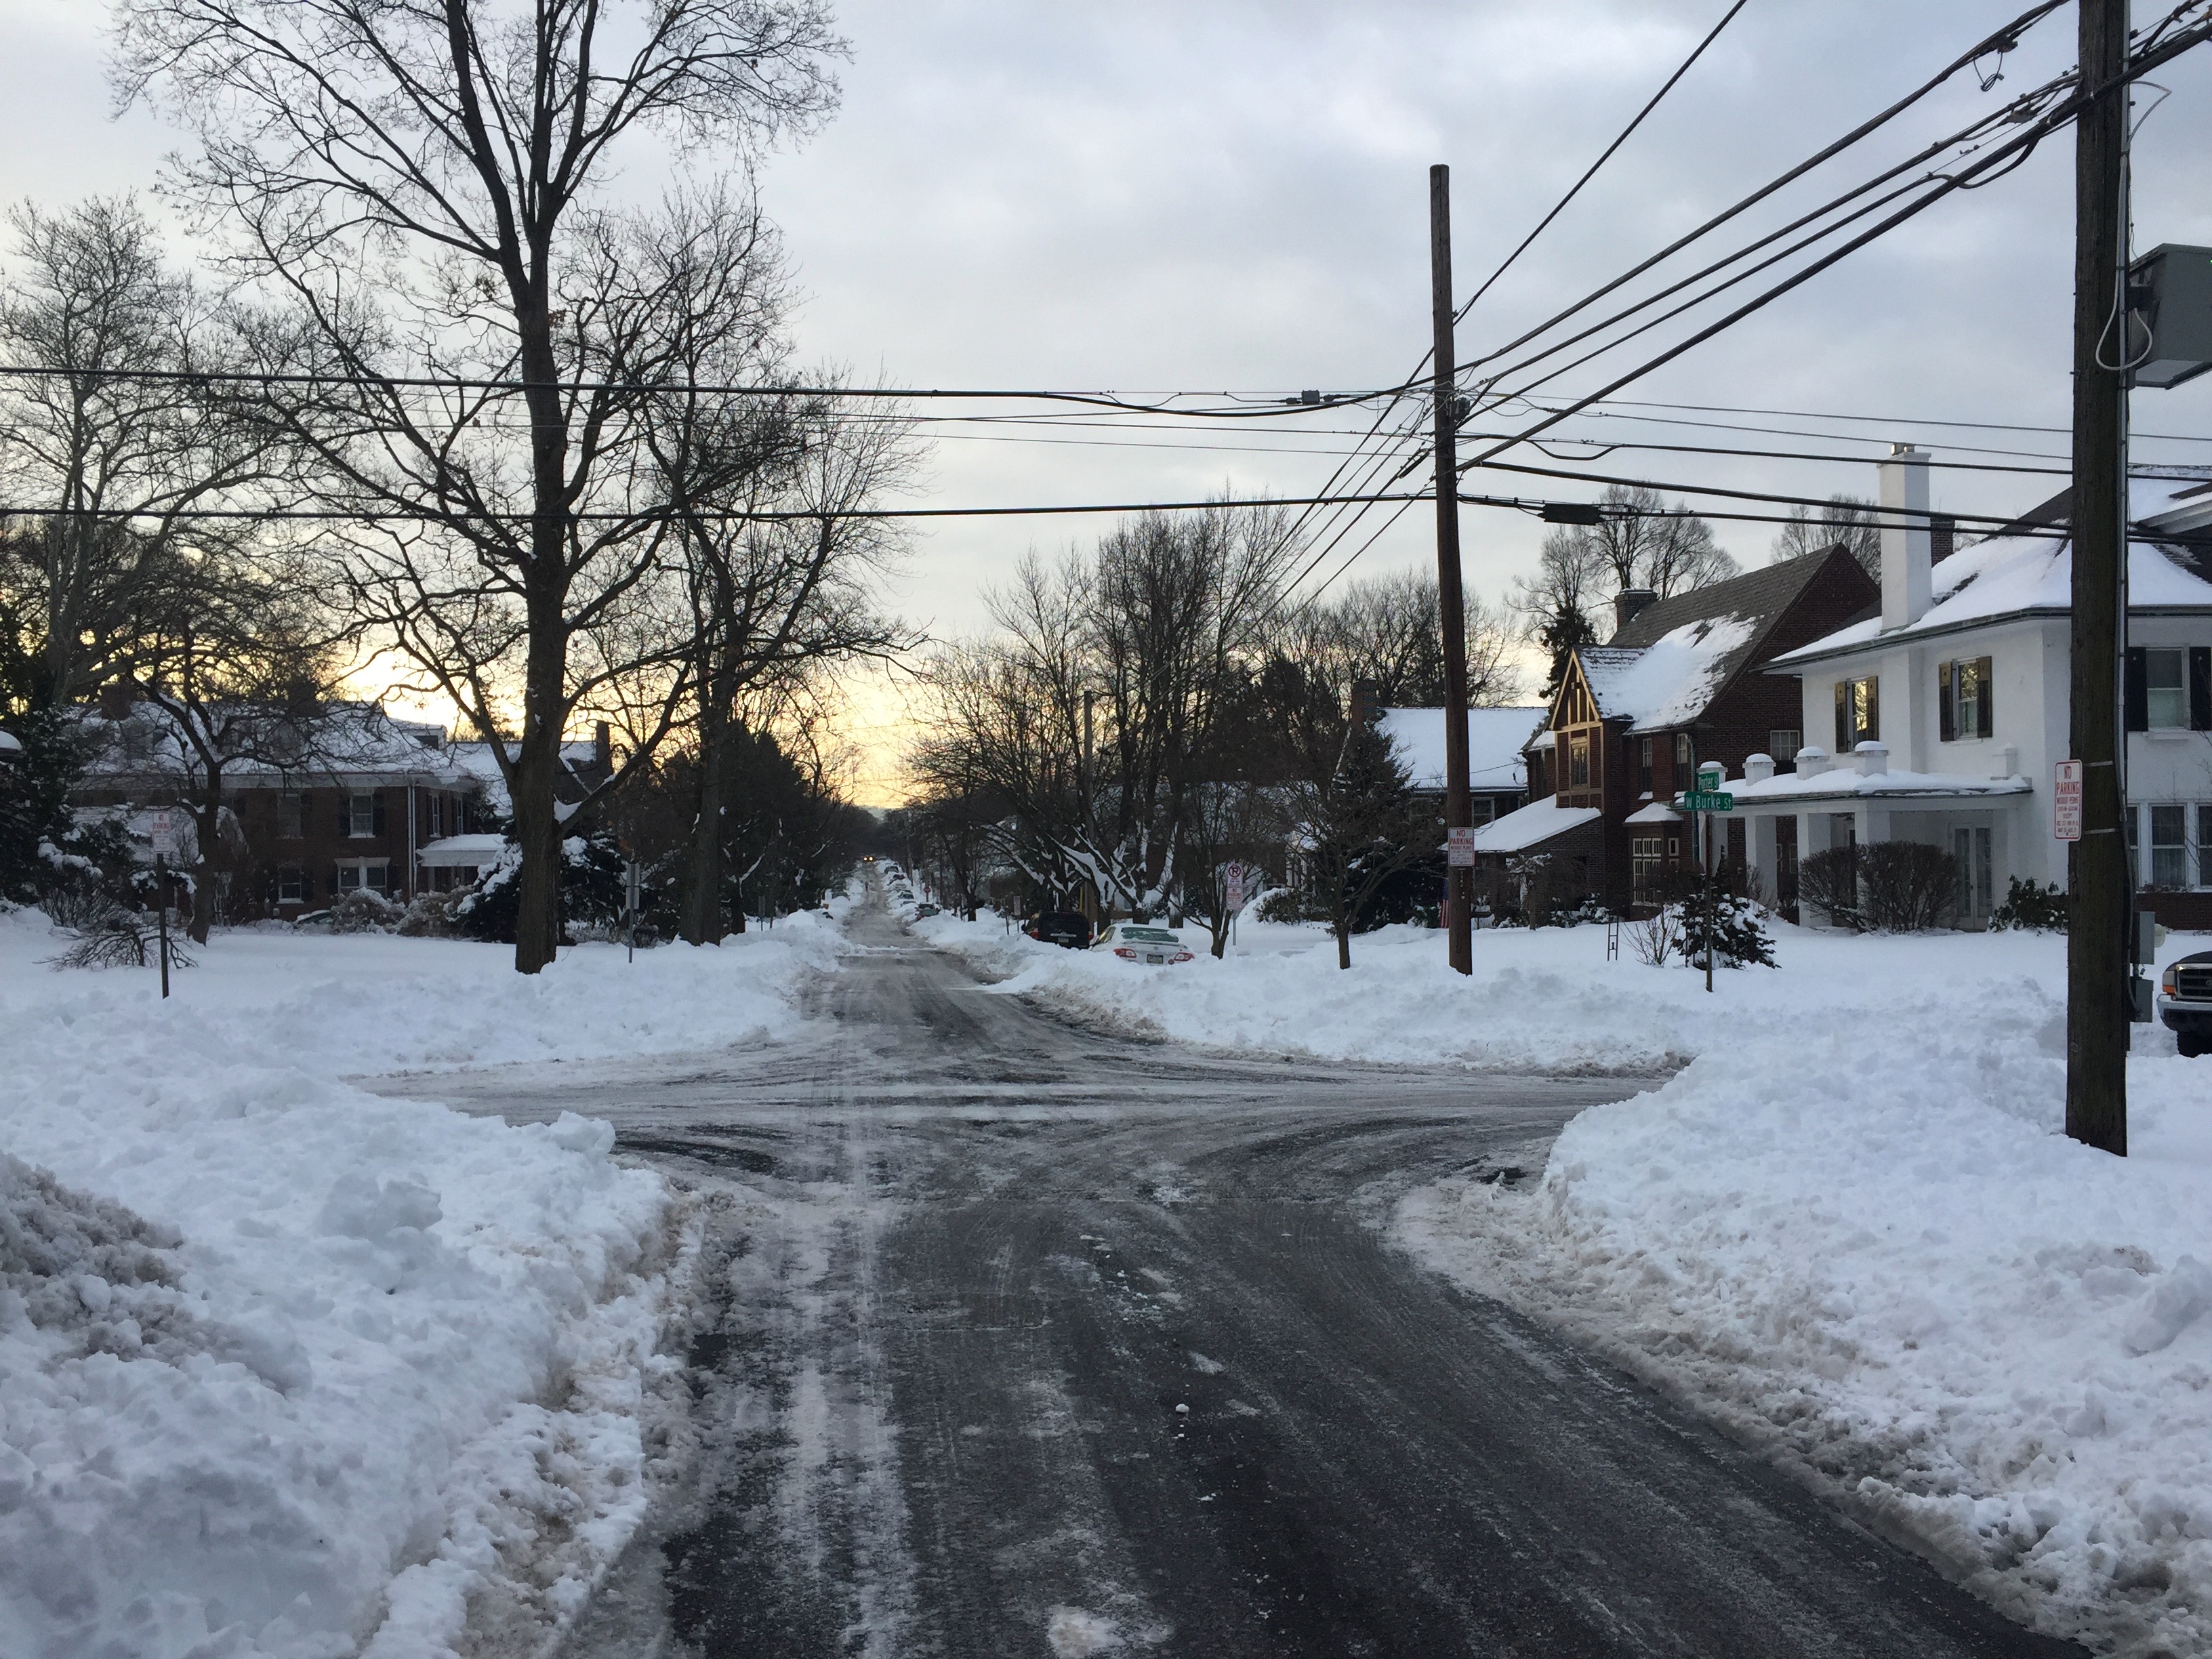 The snowy aftermath of January 2016's blizzard. It sidelined my exercise regime for a few days.